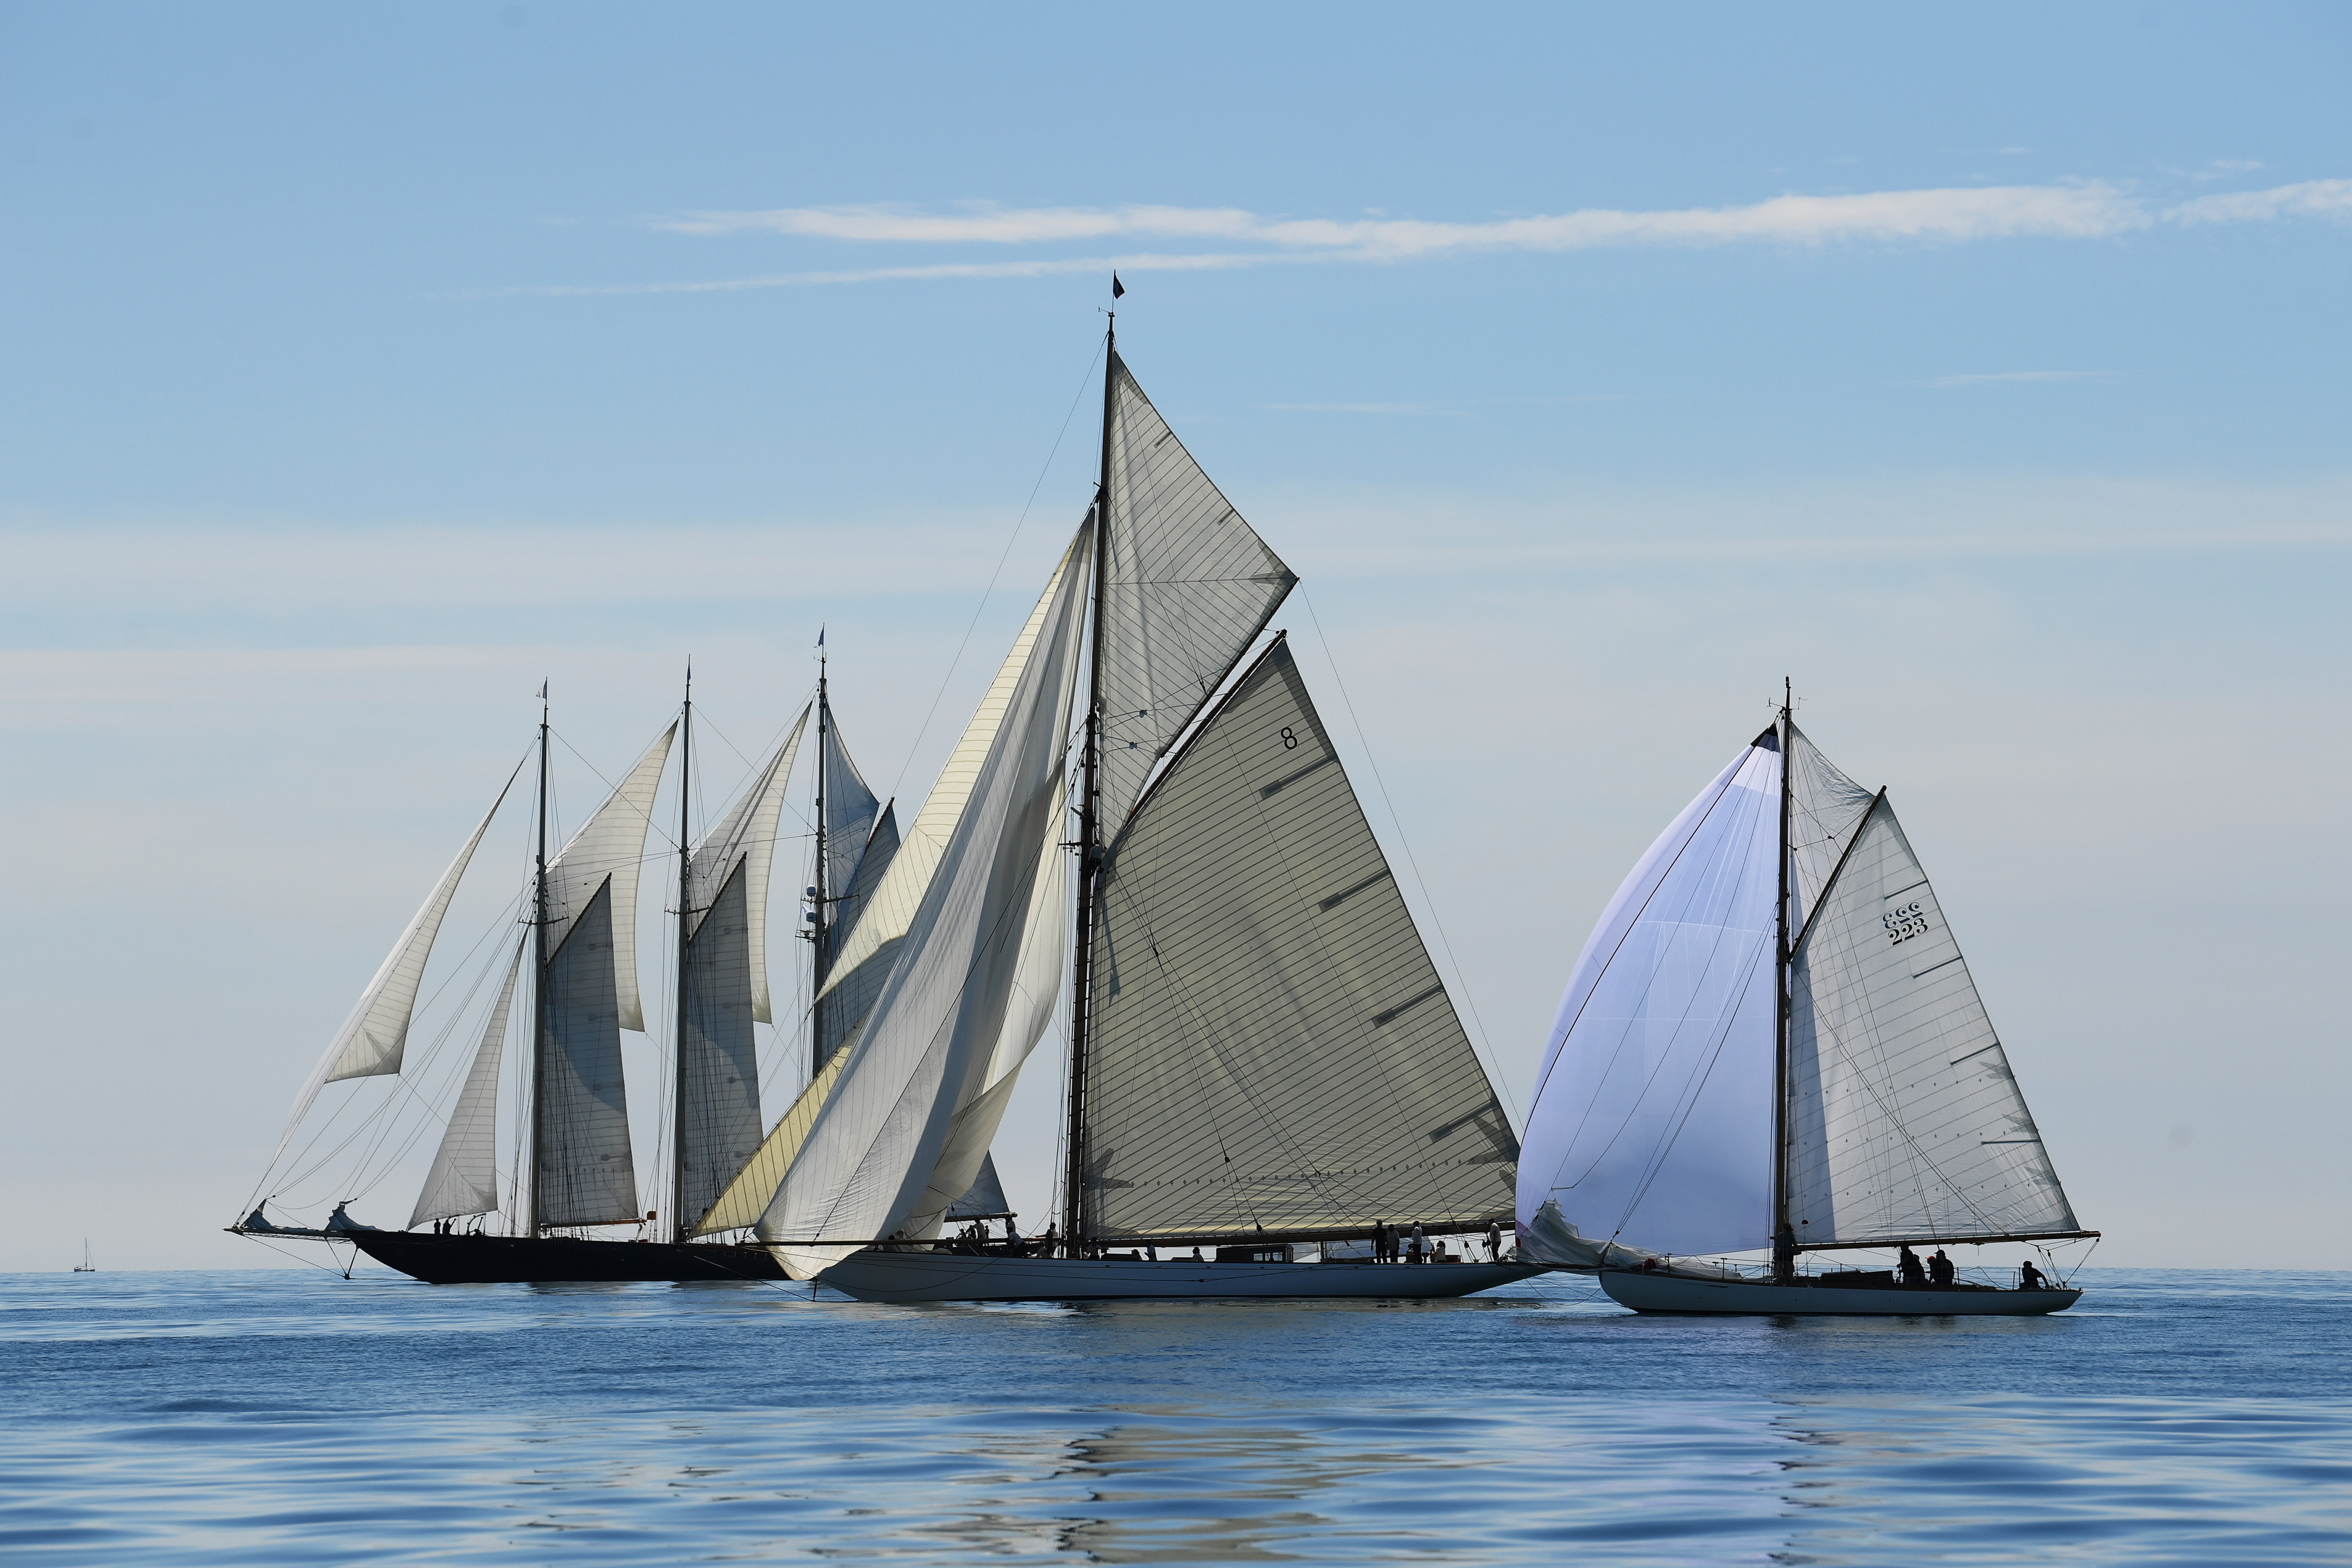 The inaugural Richard Mille Cup saw a fleet of  pre-war yacht designs compete across eight races between Falmouth, England and Le Havre, France. Photo: Getty Images